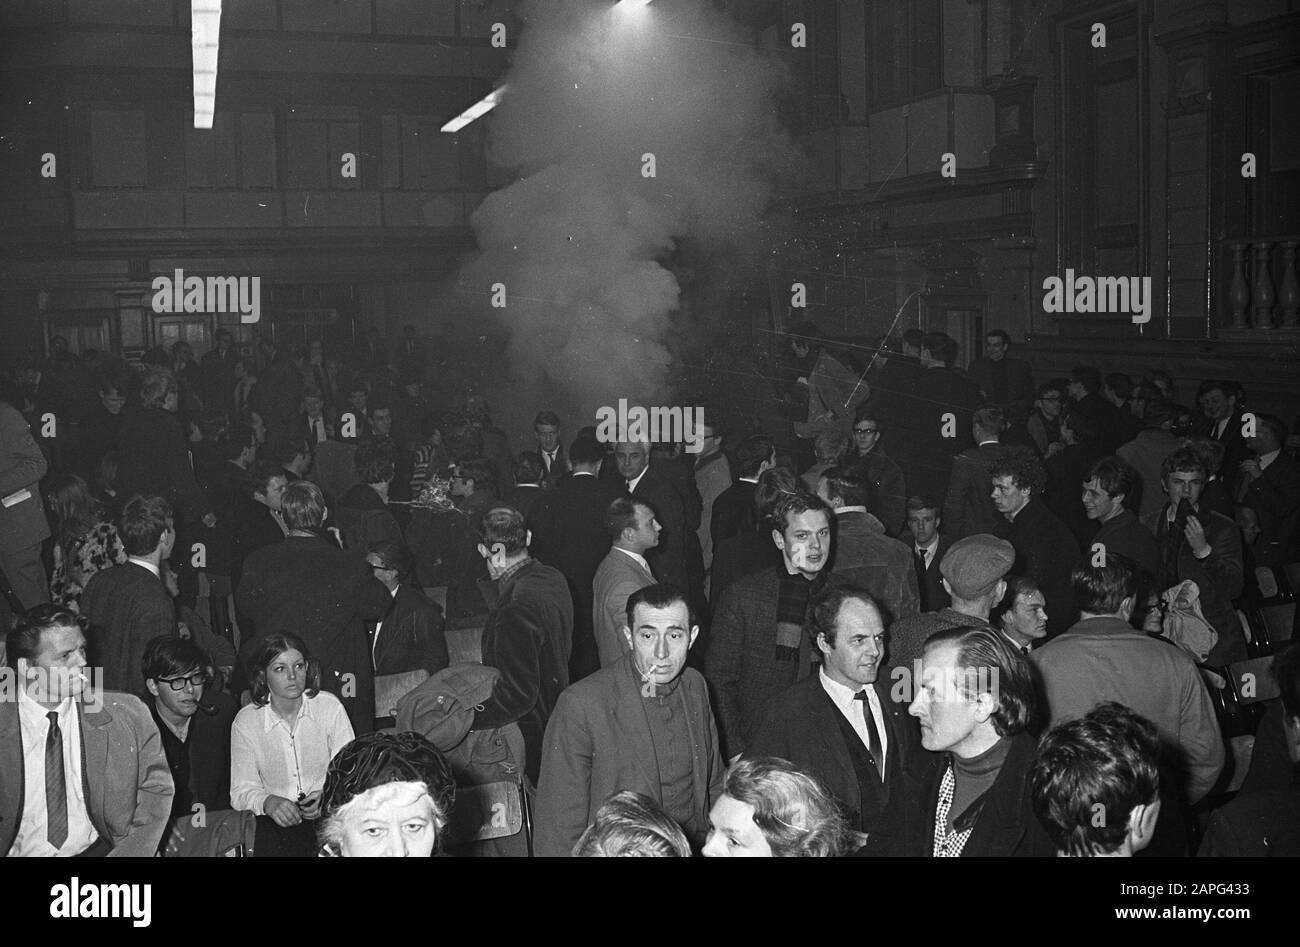 The bomb party Black and White Stock Photos & Images - Alamy